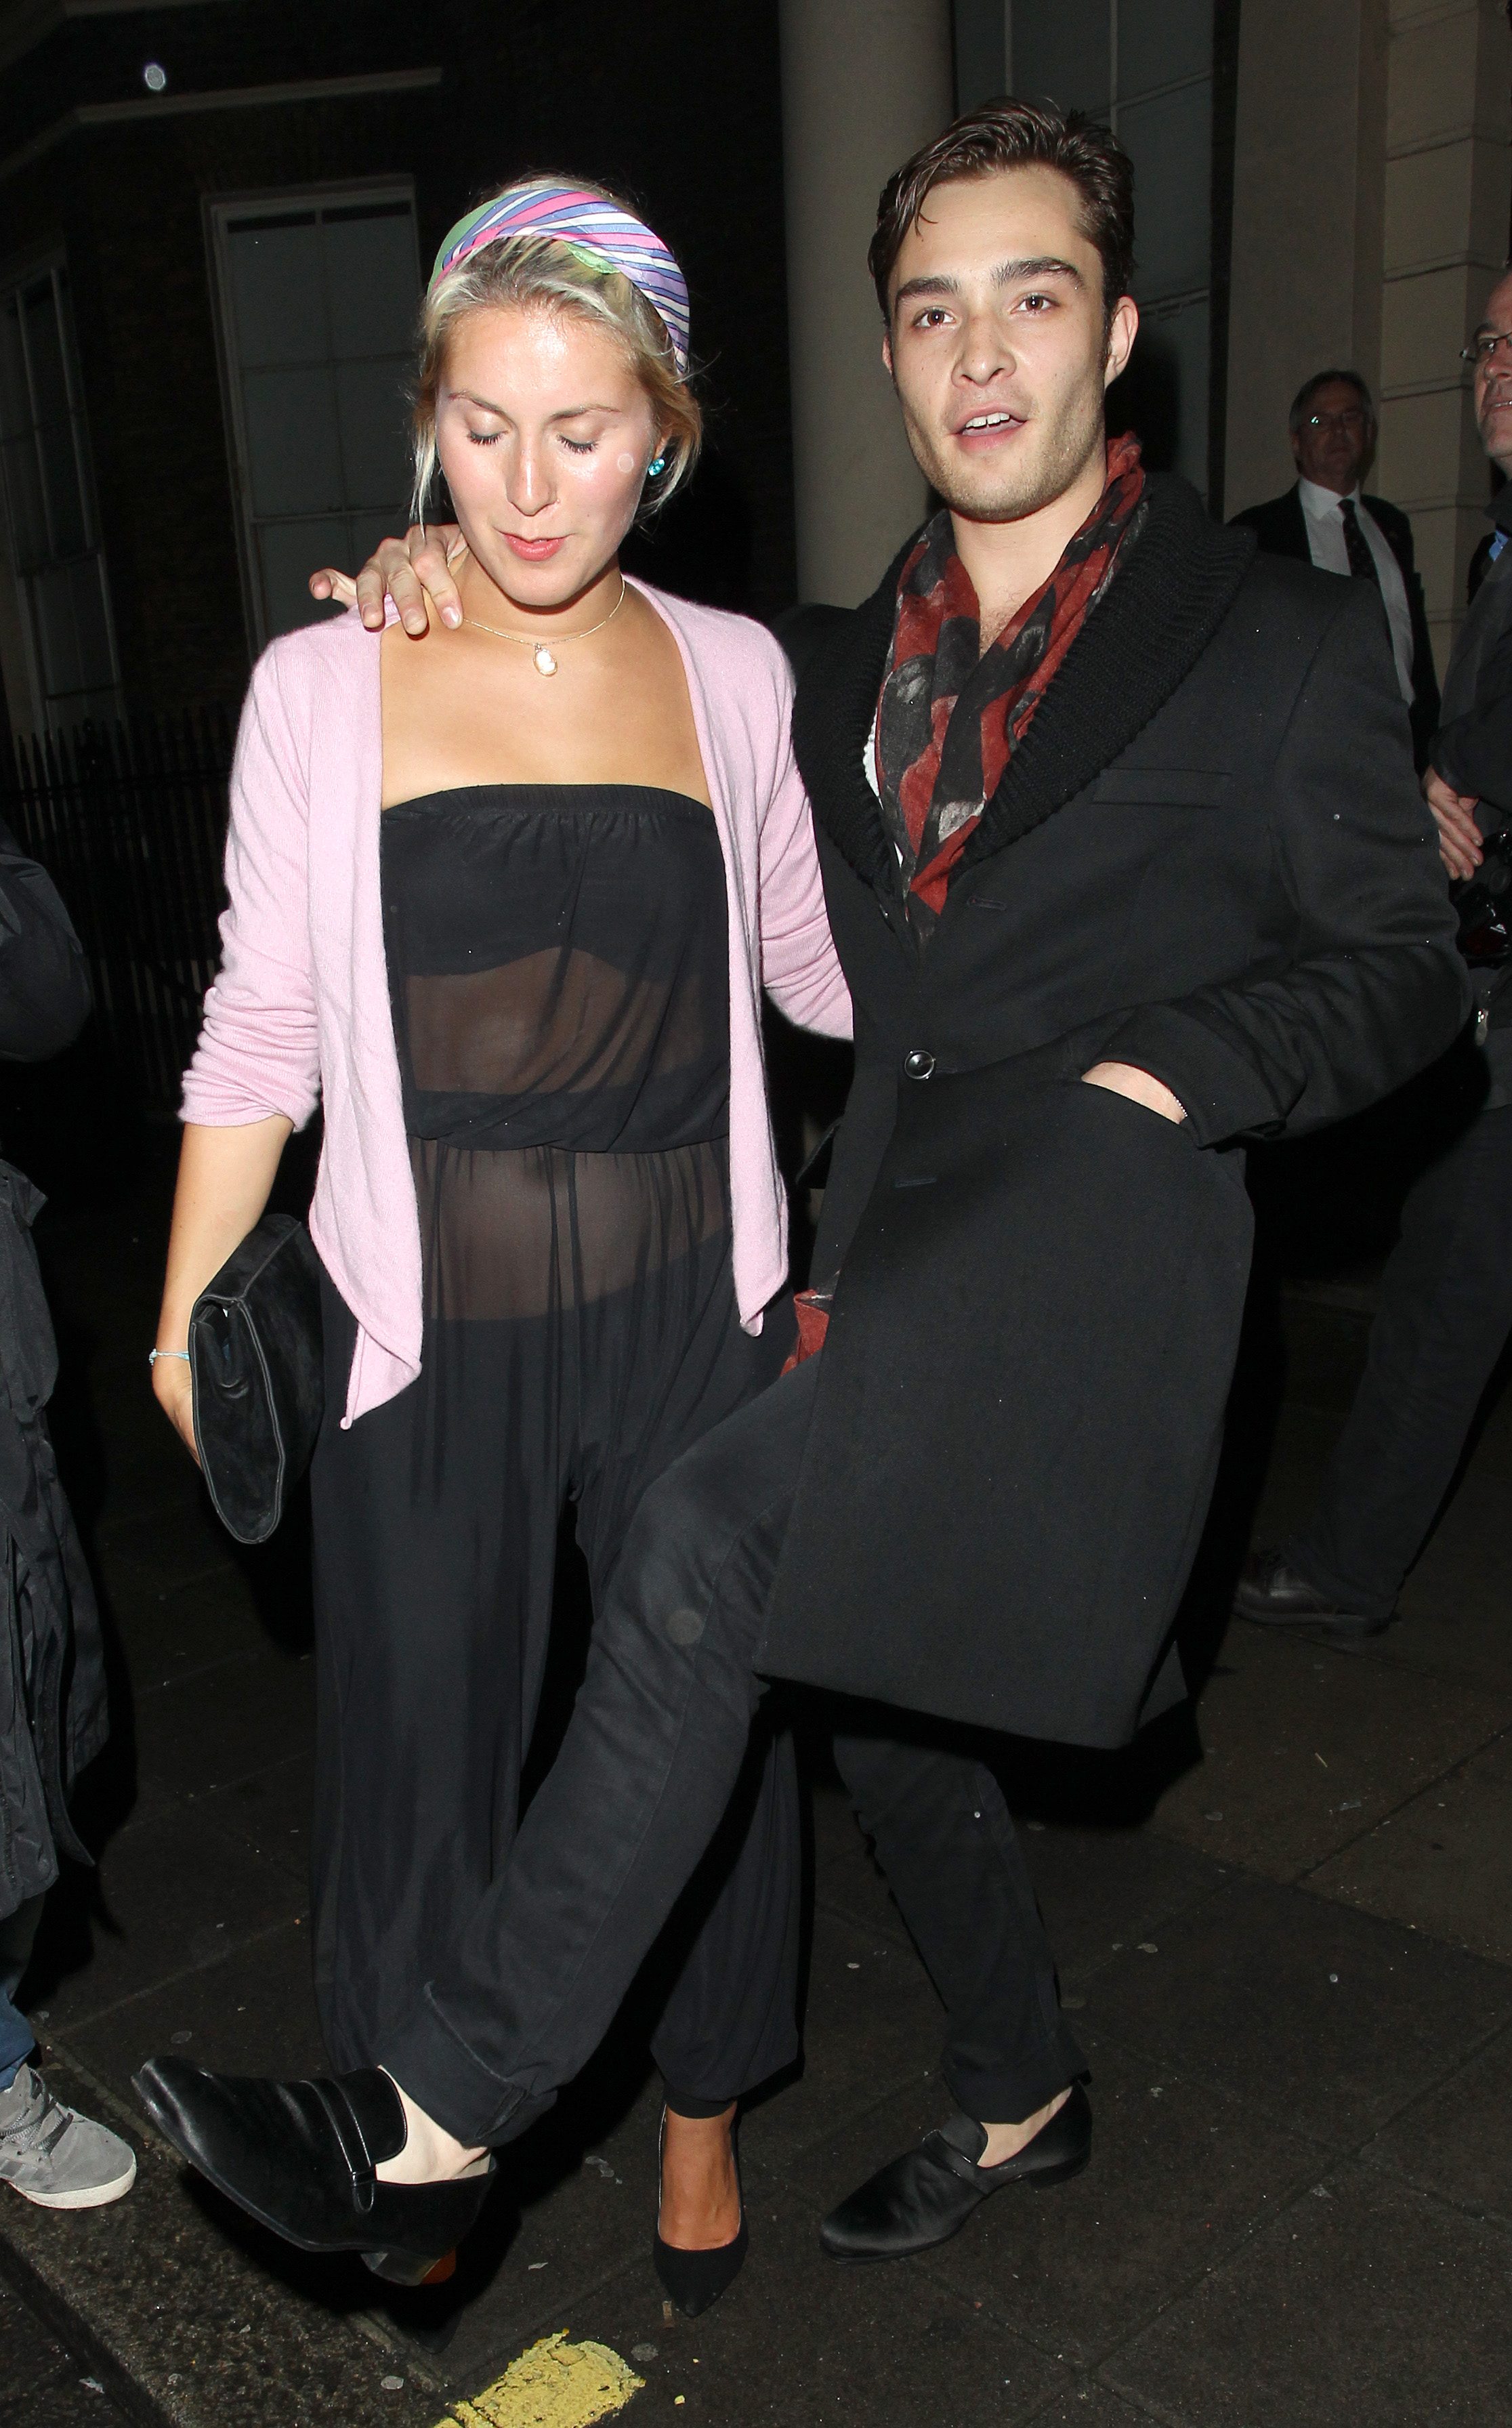 Ed Westwick leaving The Tamara Drewe Premier Afterparty at Home House in London